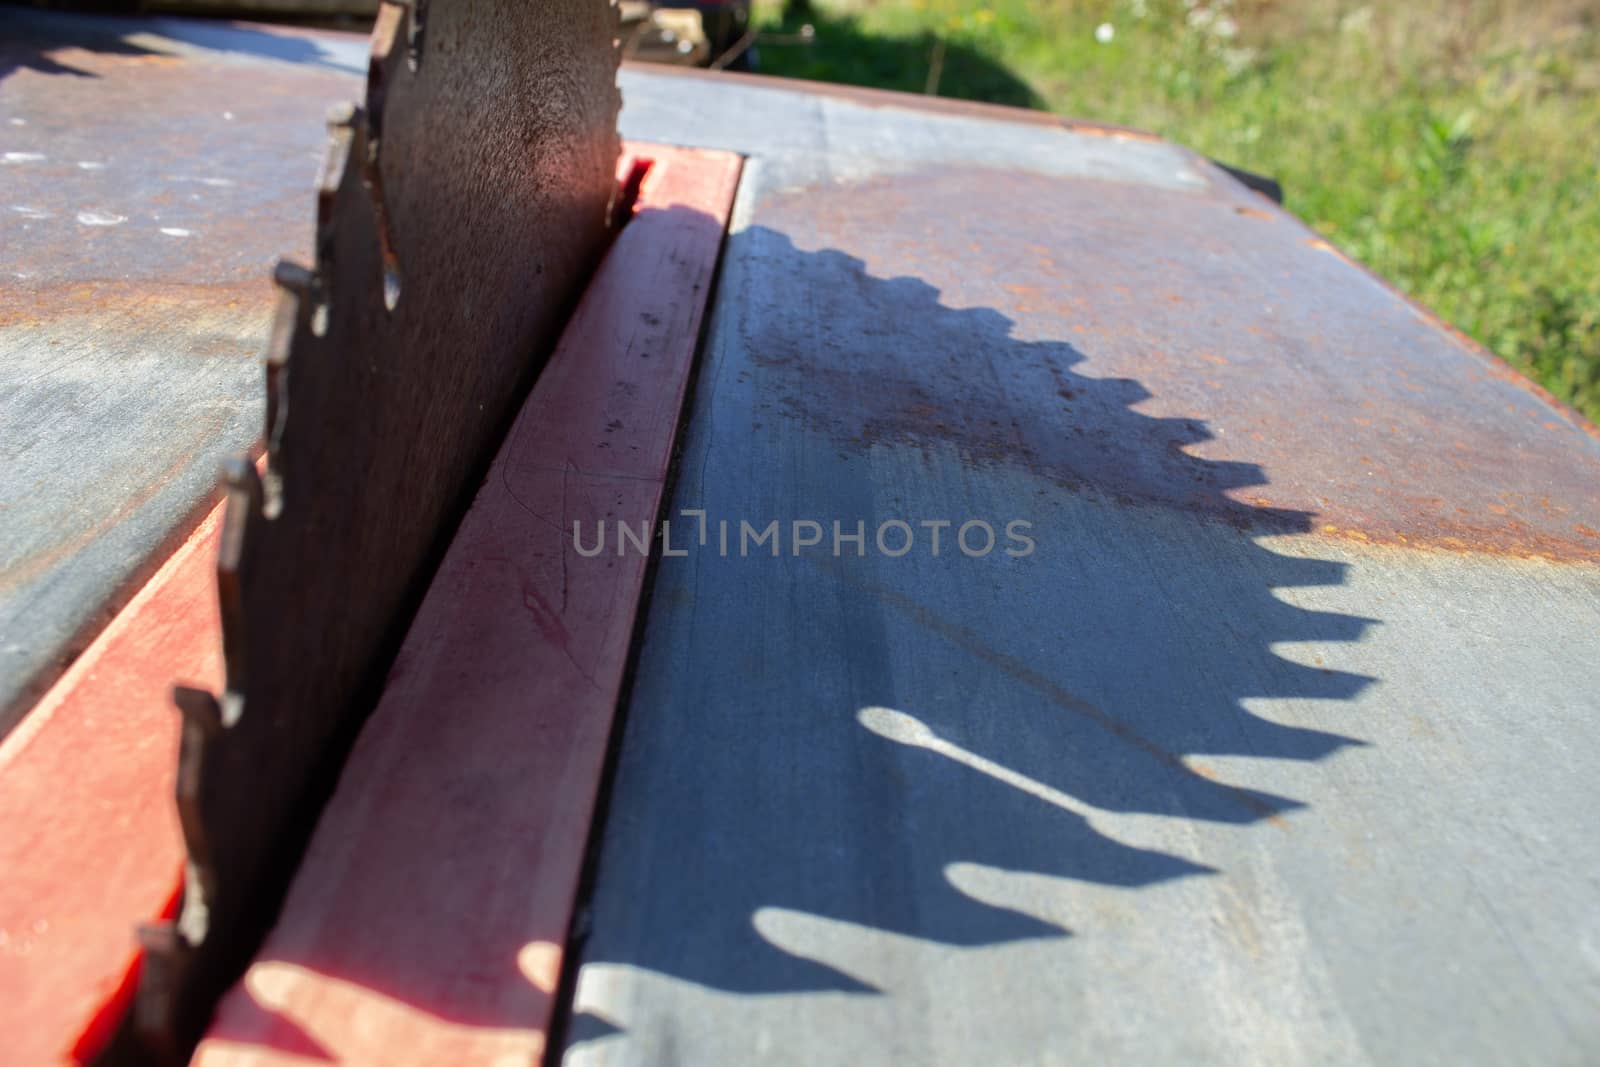 Round saw with teeth in the machine and its shadow.